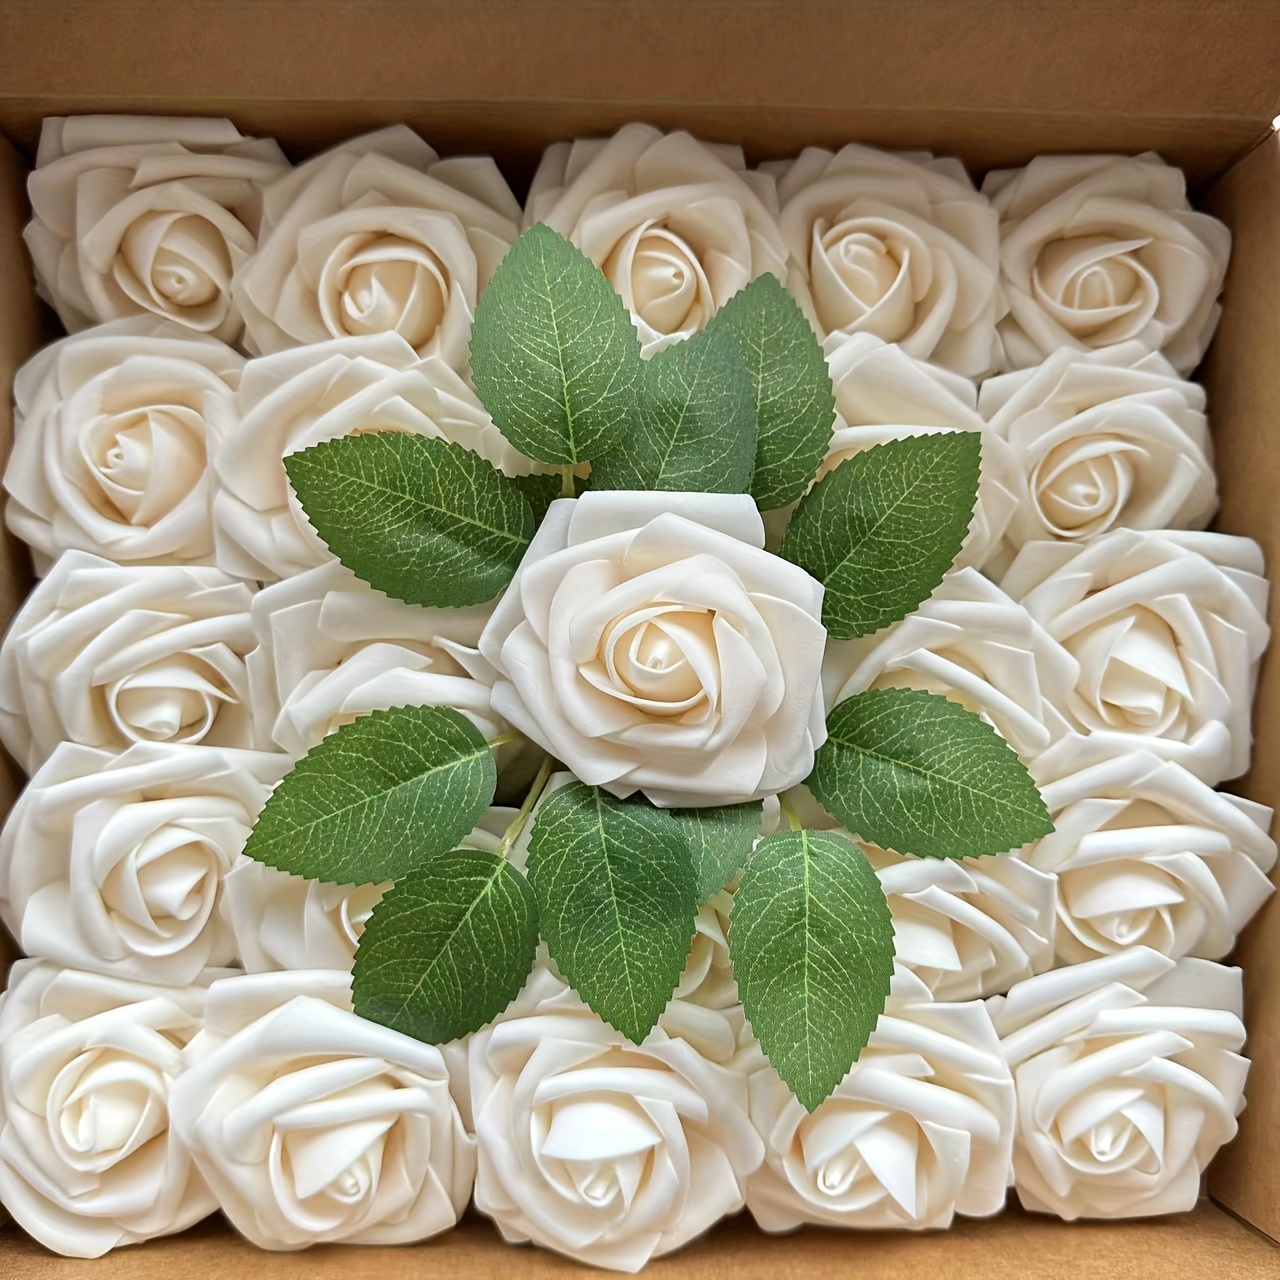 Mocoosy 50Pcs Artificial Rose Flowers, Ivory White Fake Roses for  Decorations, Real Looking Foam Rose Bulk with Stems for DIY Wedding  Bouquets Bridal